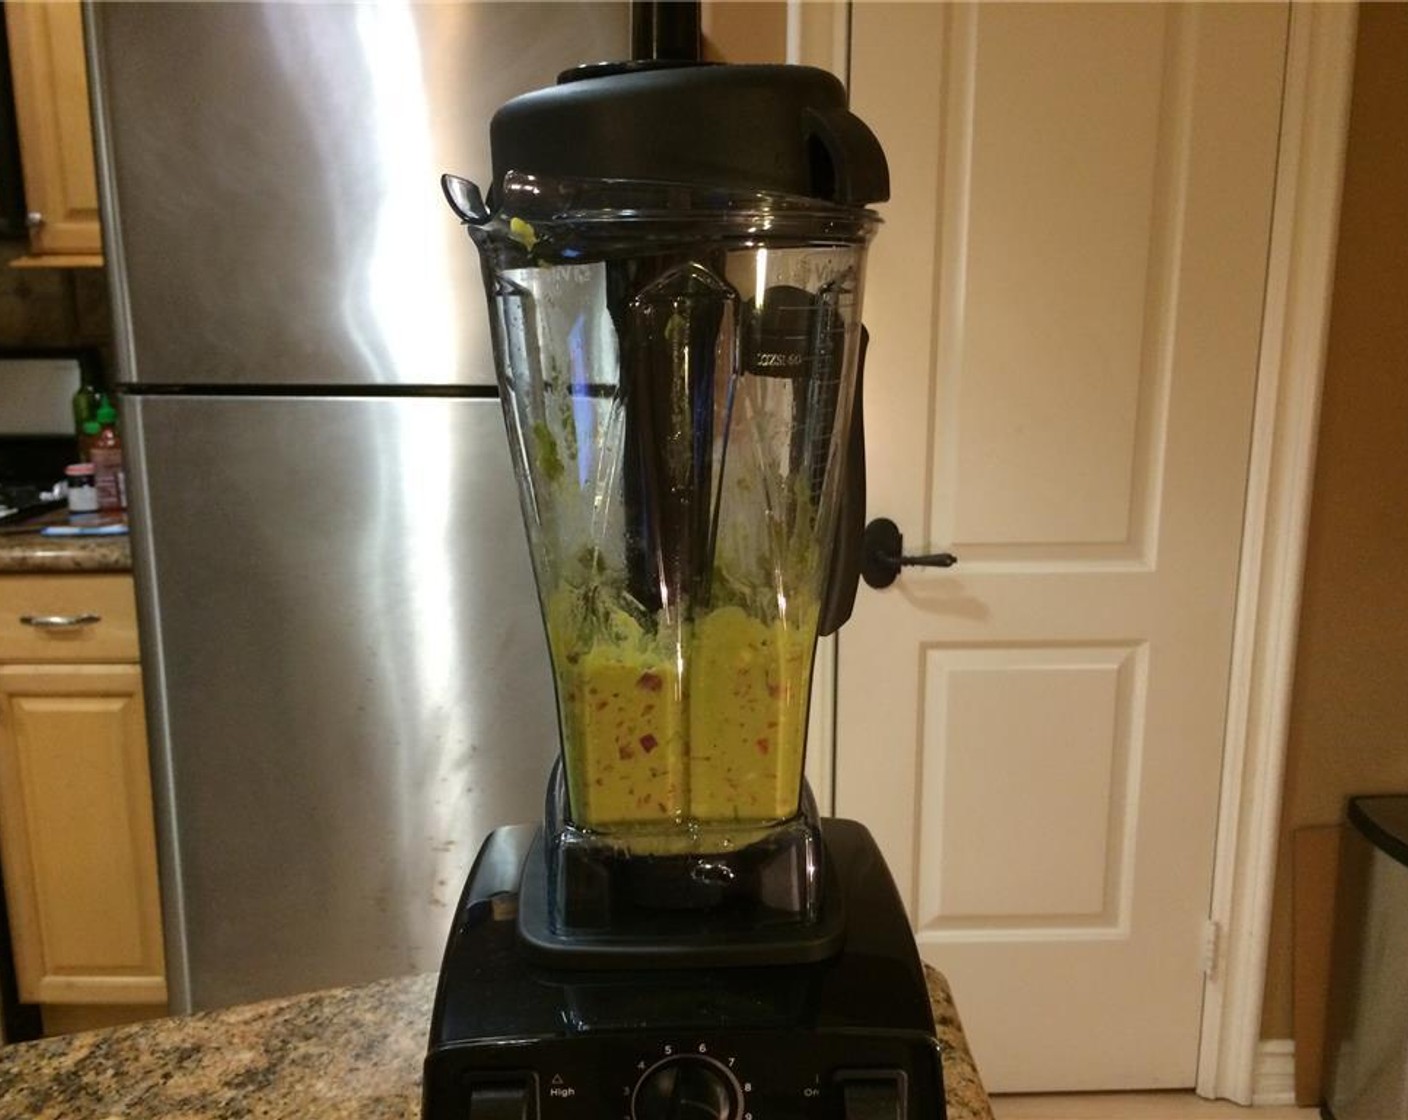 step 2 Add the vegetables to the Vitamix in this order: onions, bell peppers, tomatoes, and avocados. Add Salt (1 tsp) and juice from Lemon (1) and blend on variable speed 1 and slowly move to 3 for 15-20 seconds.